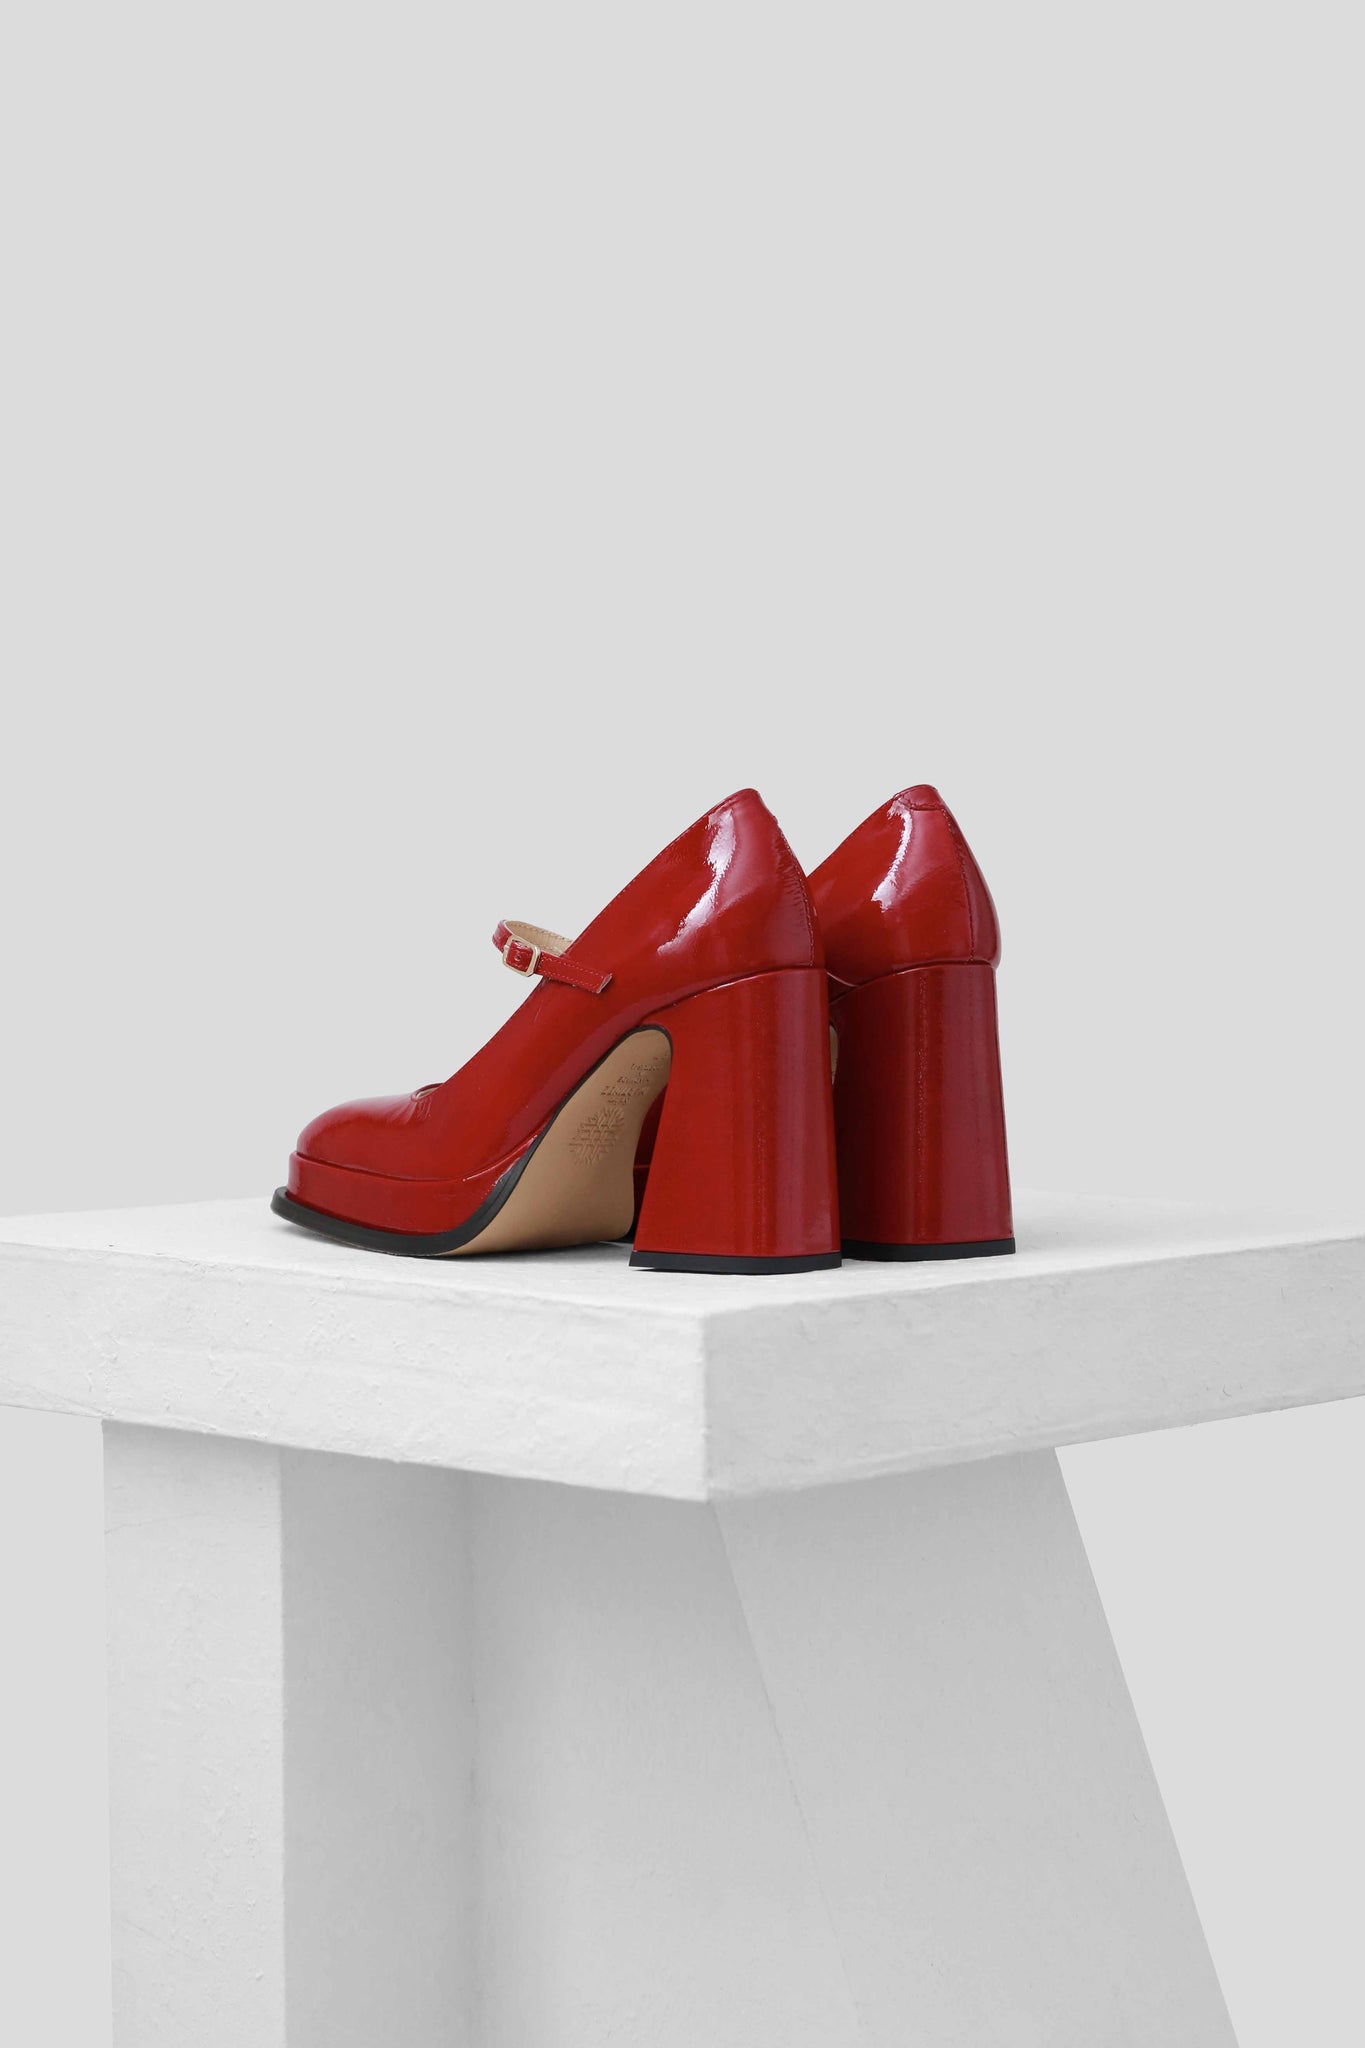 CASILDA - Berry Patent Leather Mary Jane Pumps